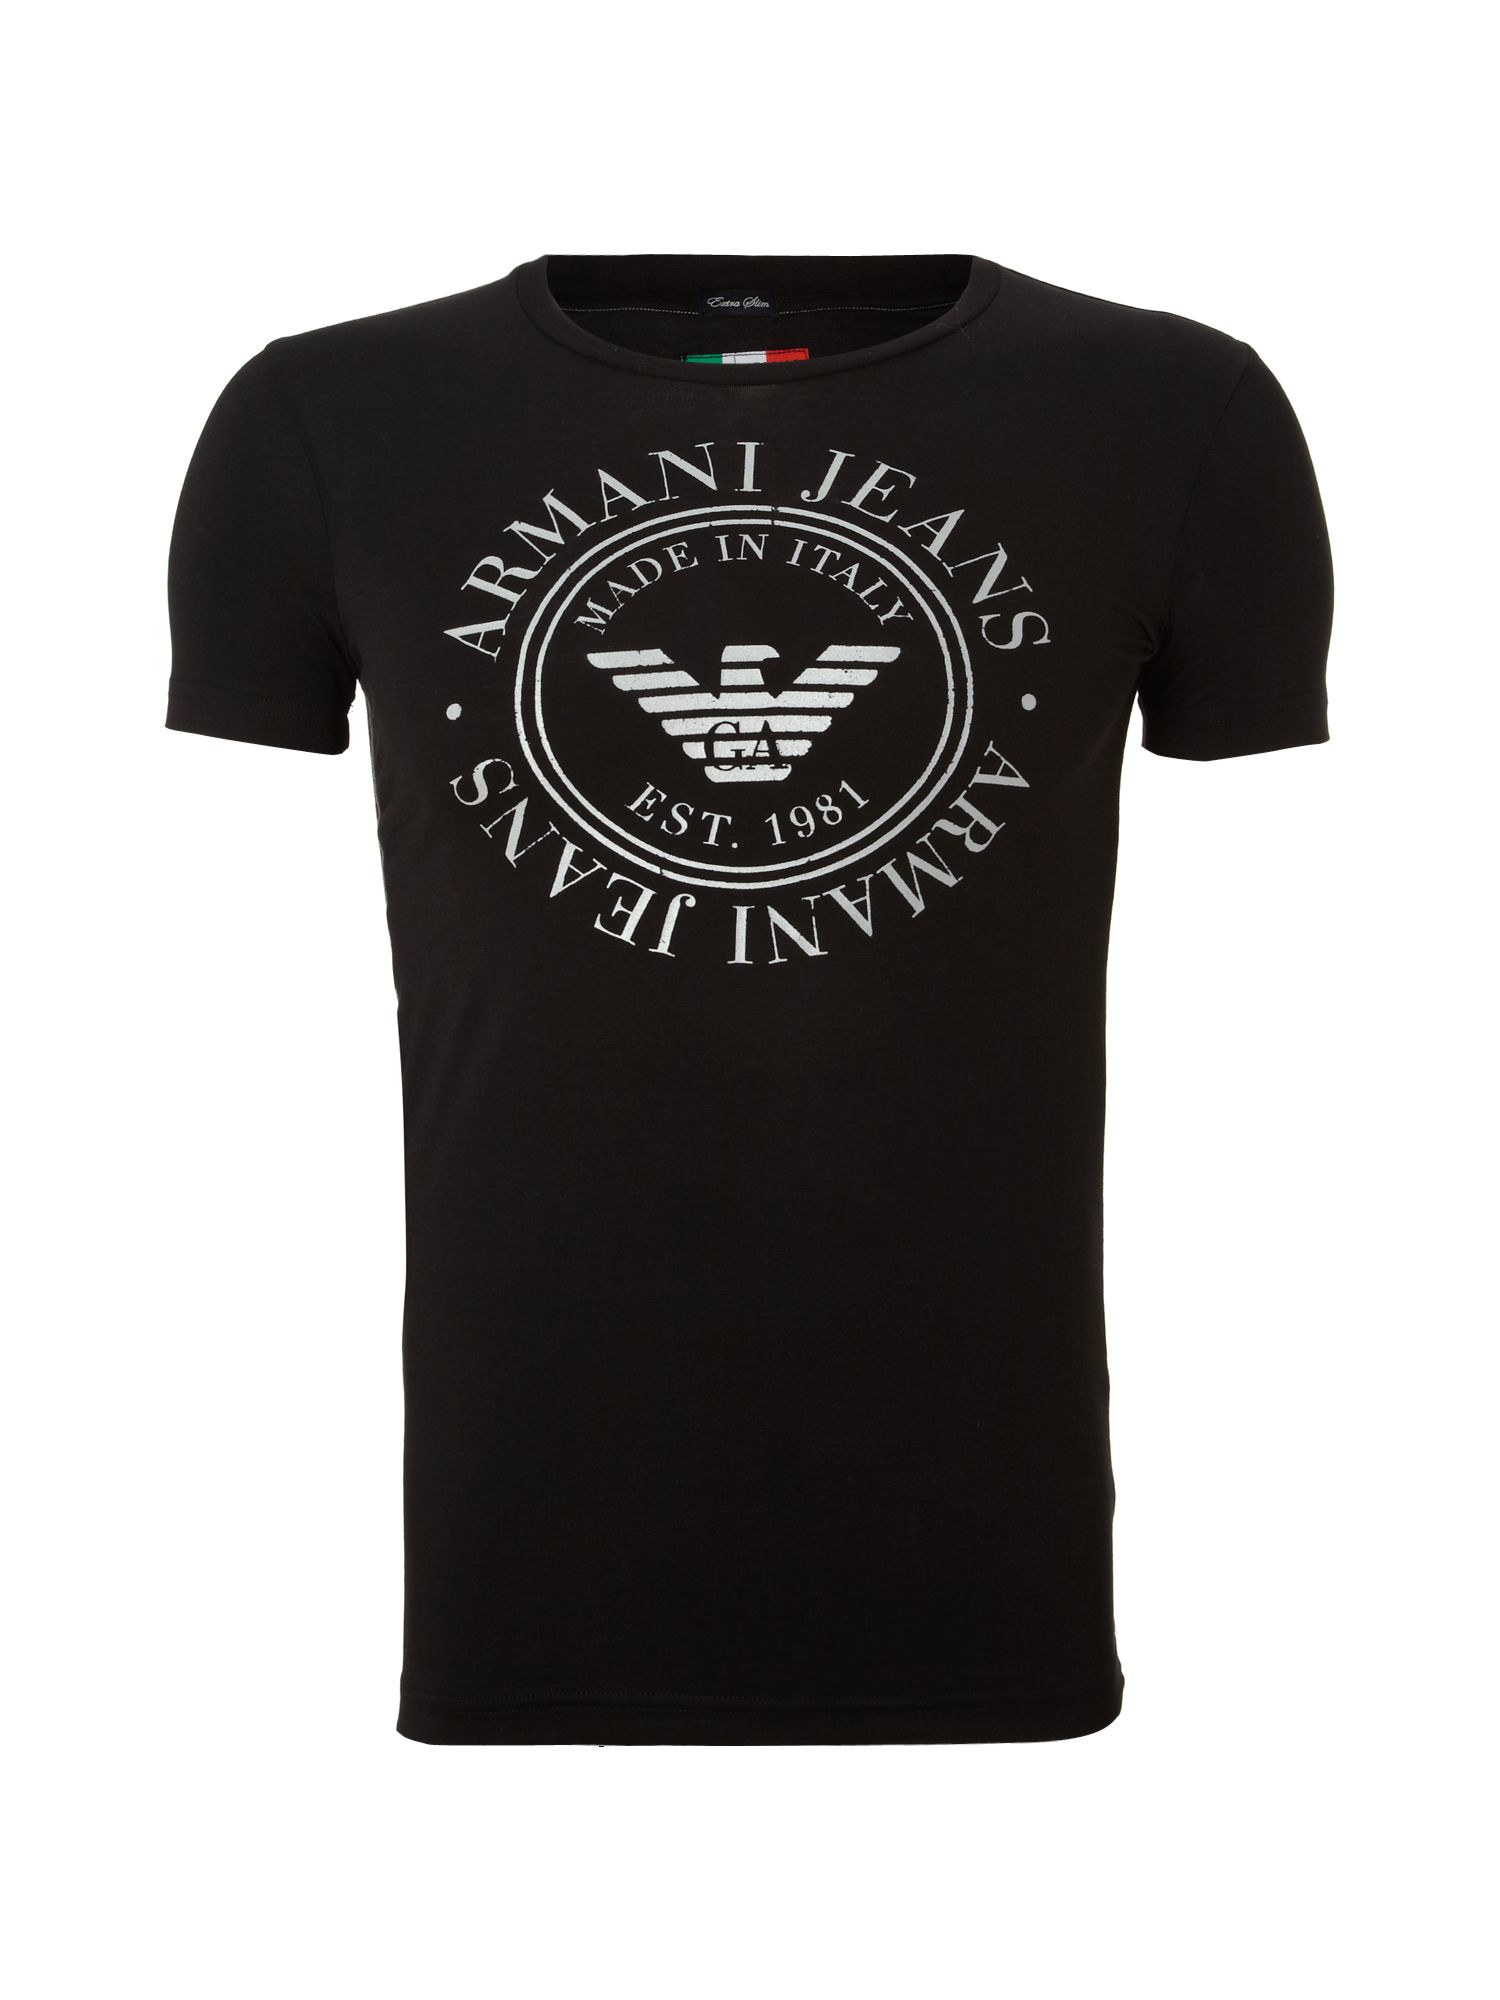 Armani Jeans Made in Italy Printed T-shirt in Black for Men | Lyst